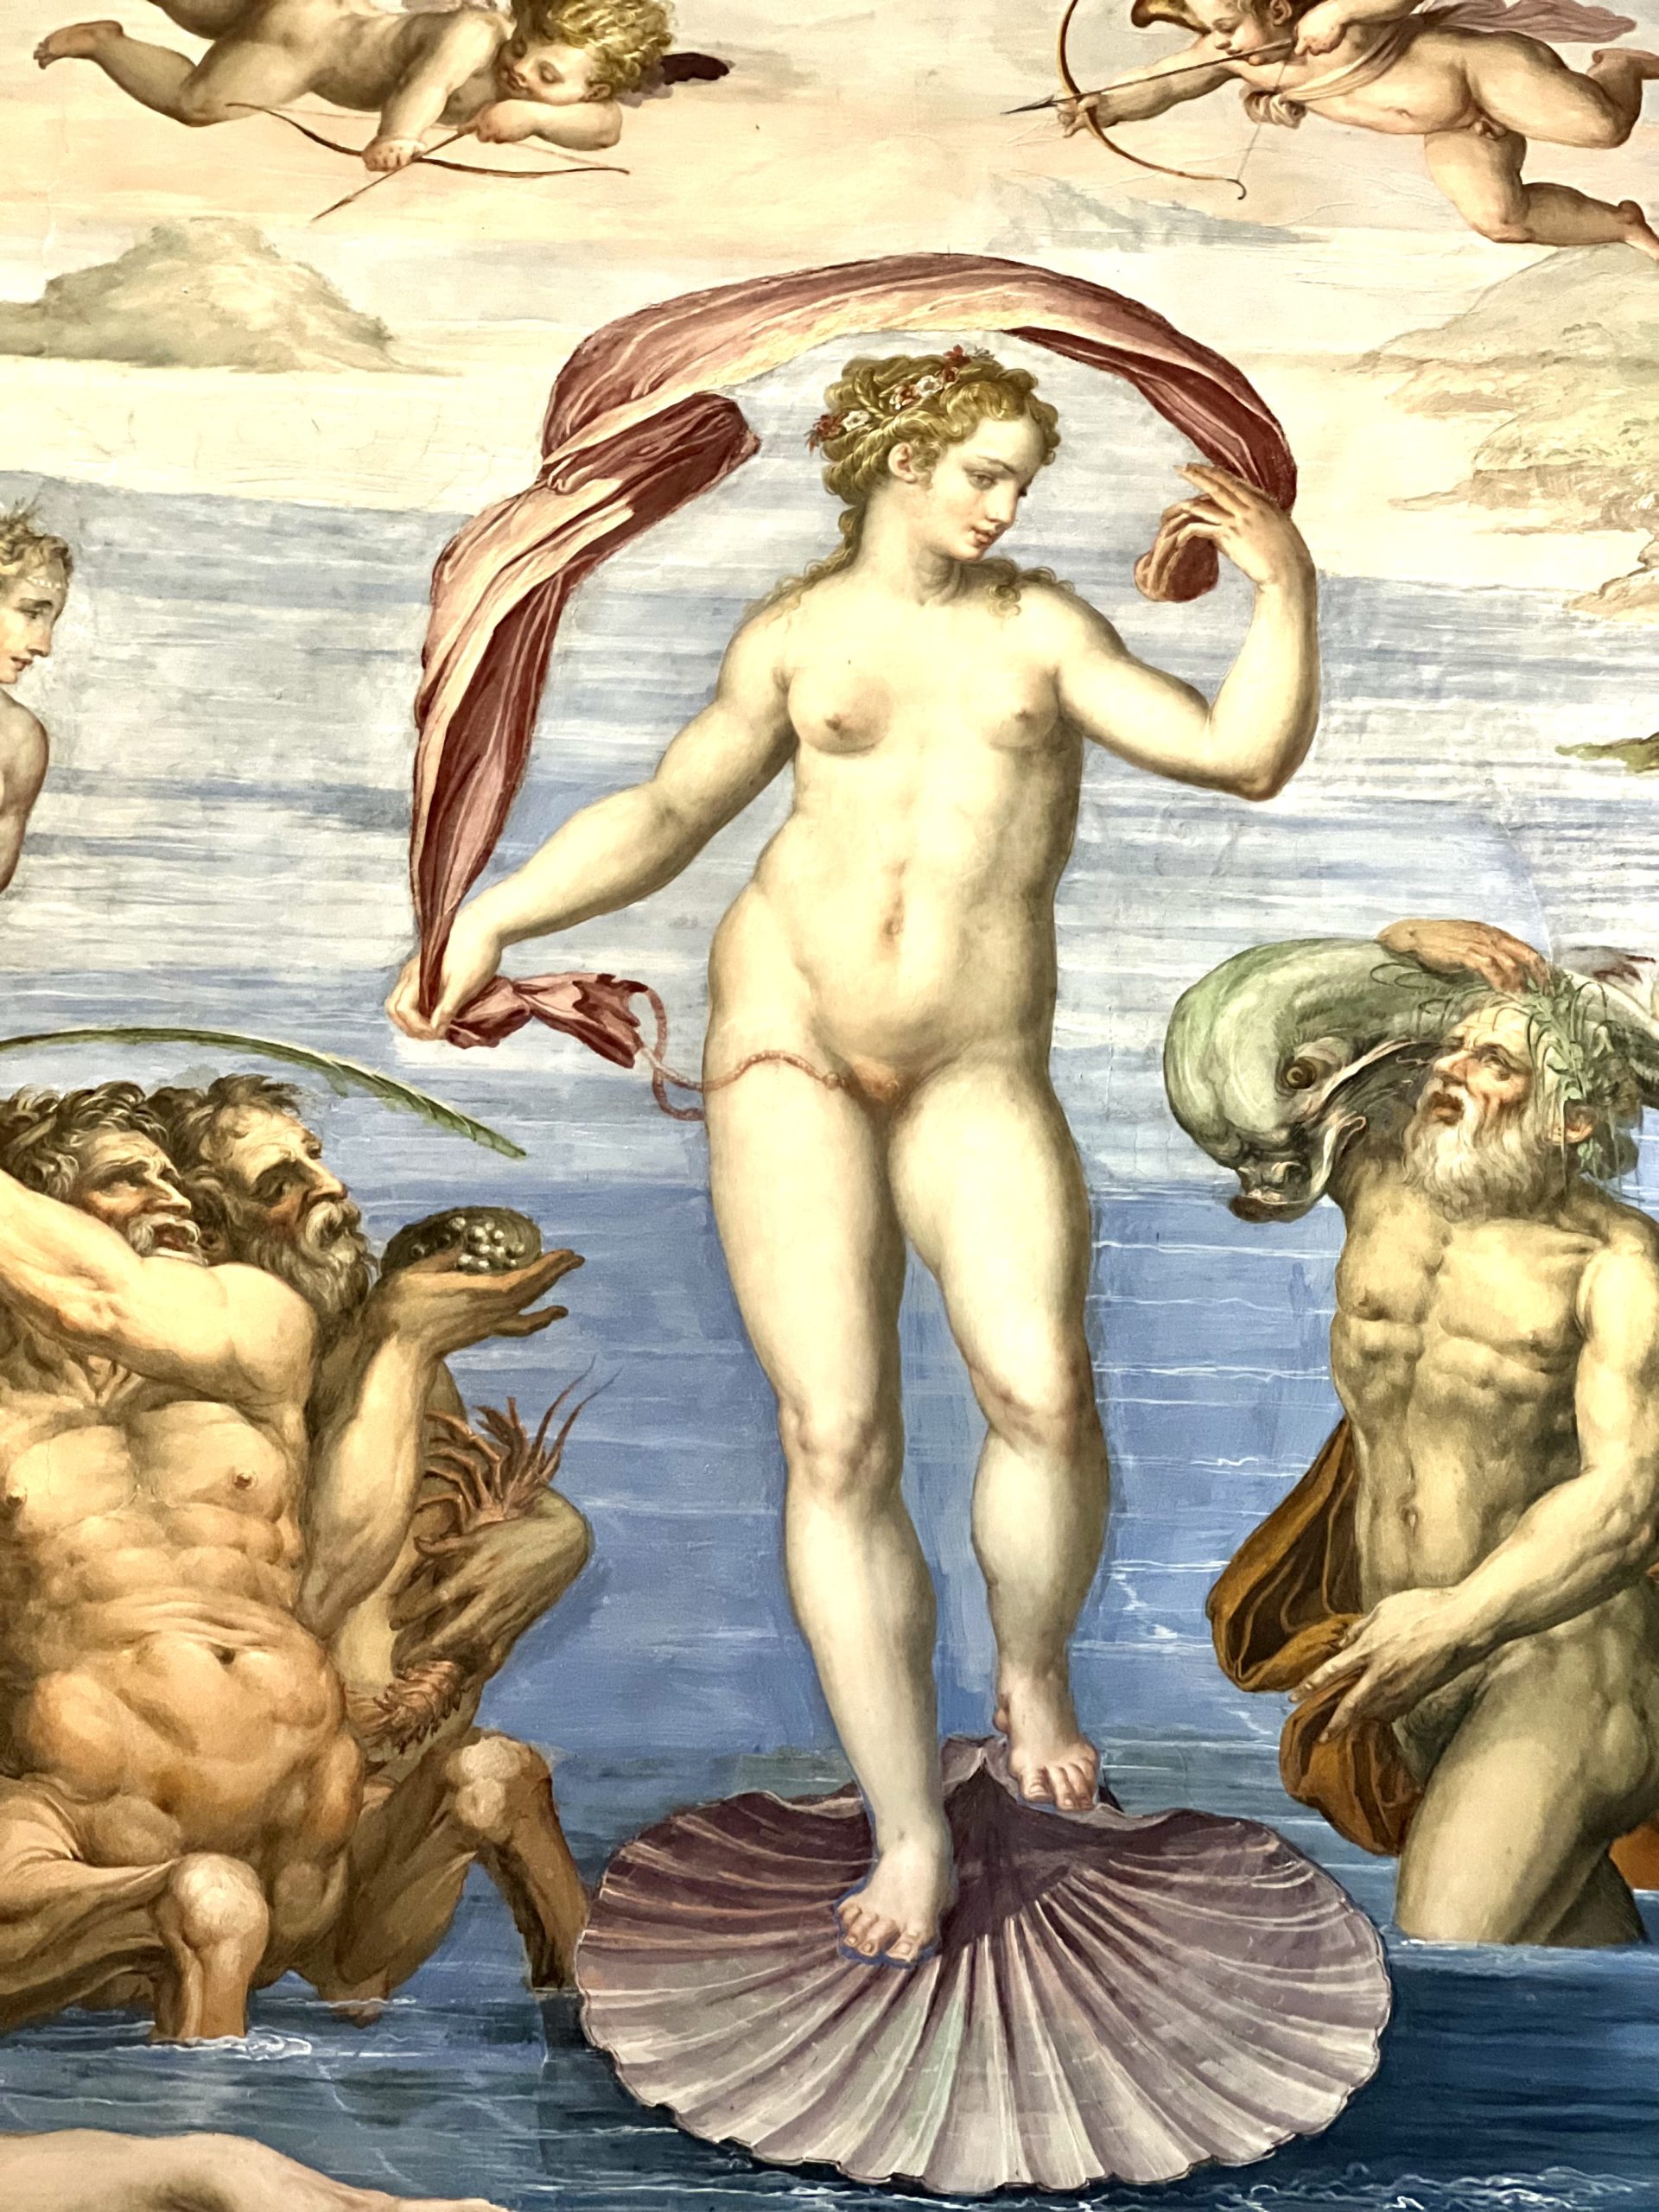 Birth of Venus in the Room of the Elements